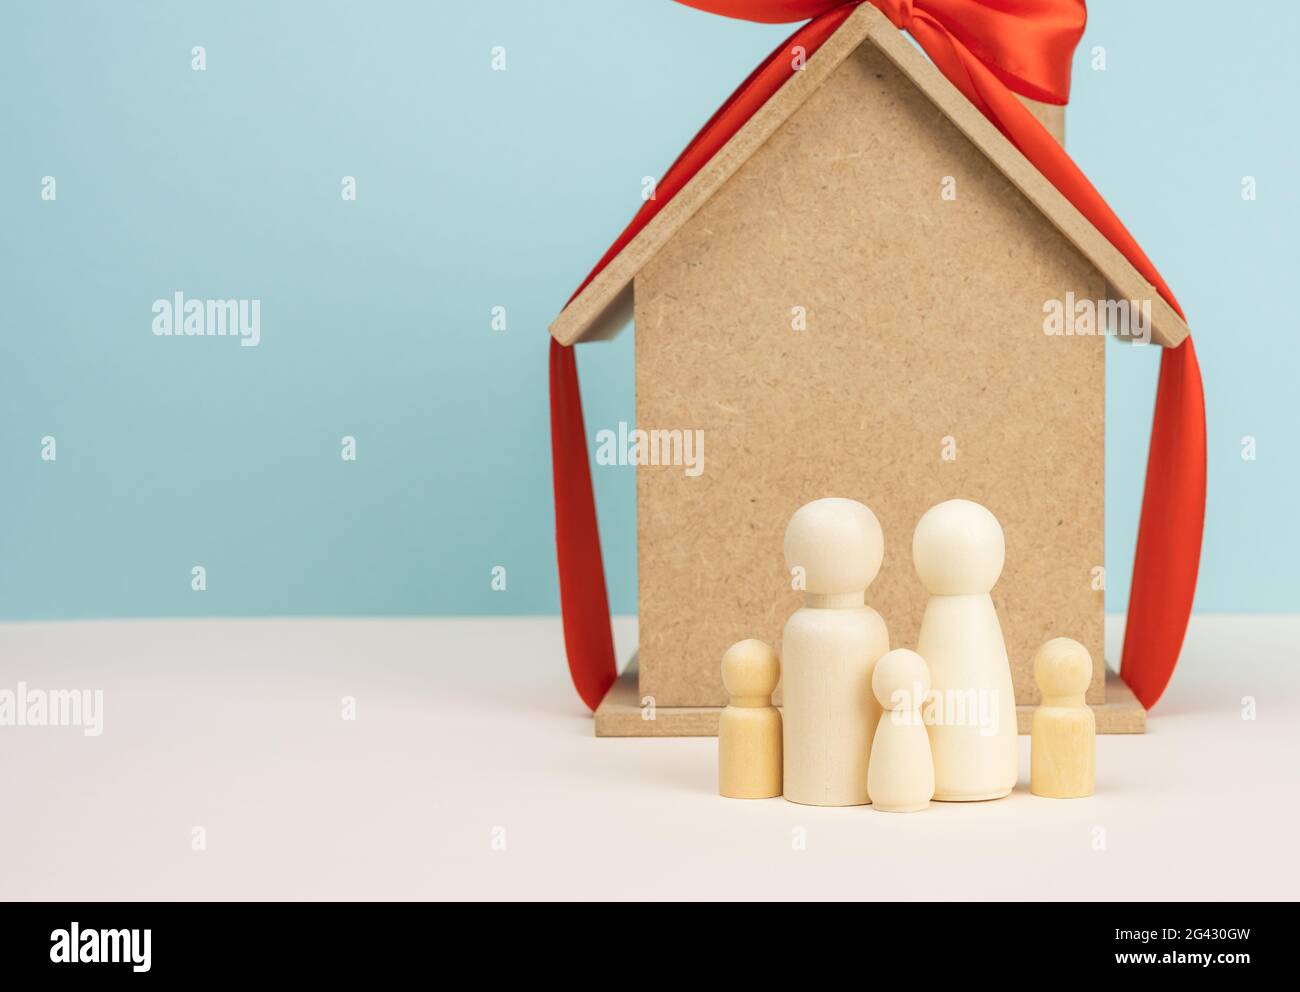 Wooden house and miniature family figures, mortgage and loan concept Stock Photo